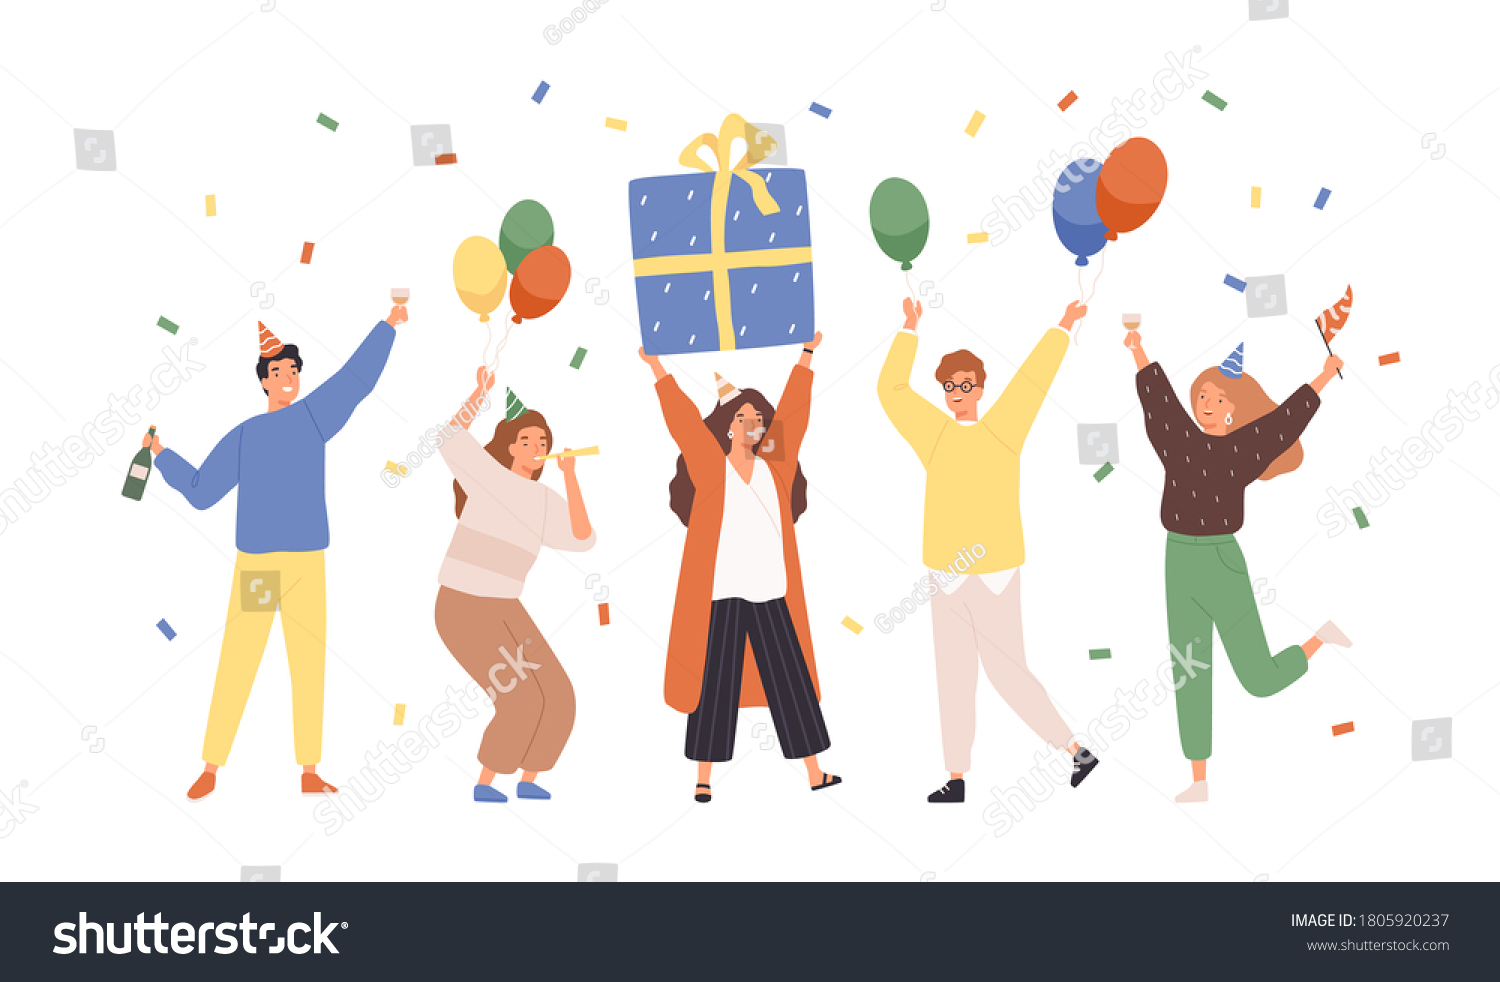 Group of happy people raising hands celebrating holiday with colorful confetti vector flat illustration. Woman hold gift box having fun with friends isolated. Person with balloons and champagne #1805920237